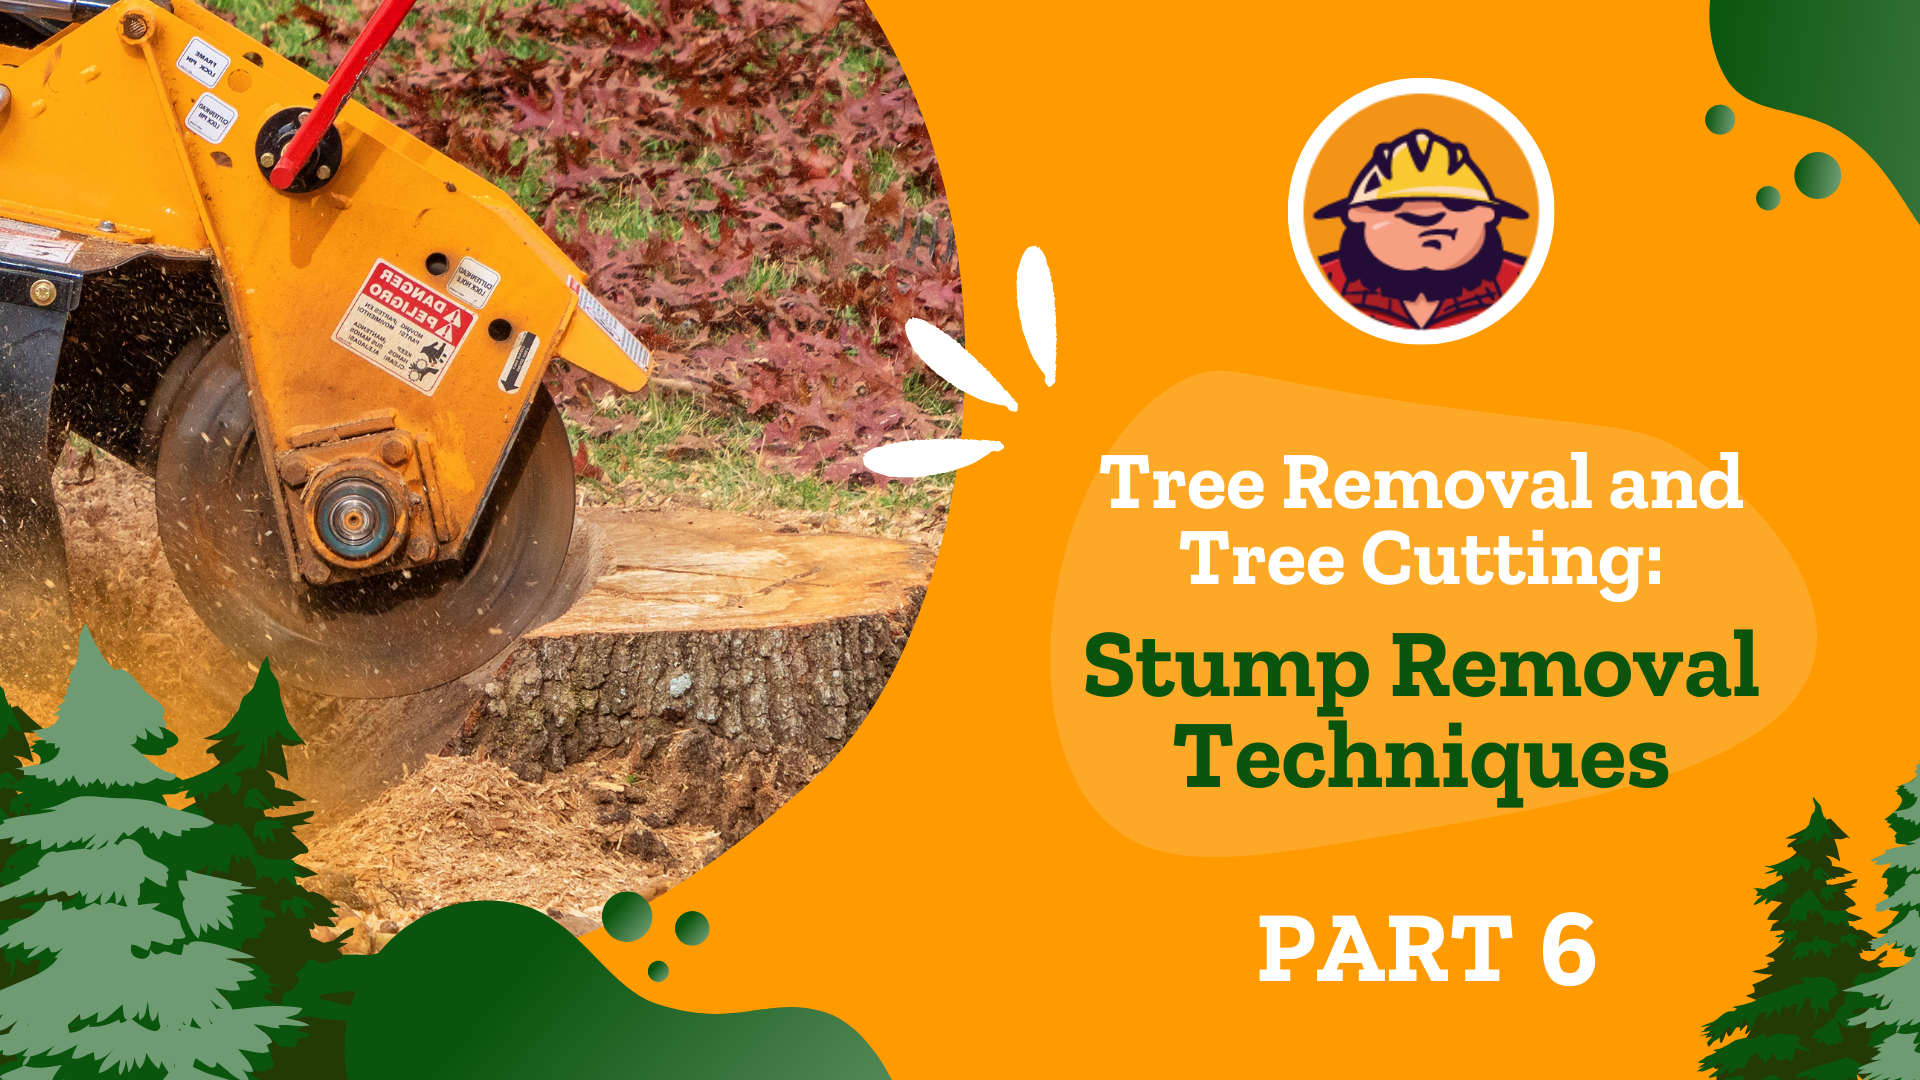 Part 6 - Tree Removal and Tree Cutting - Stump Removal Techniques